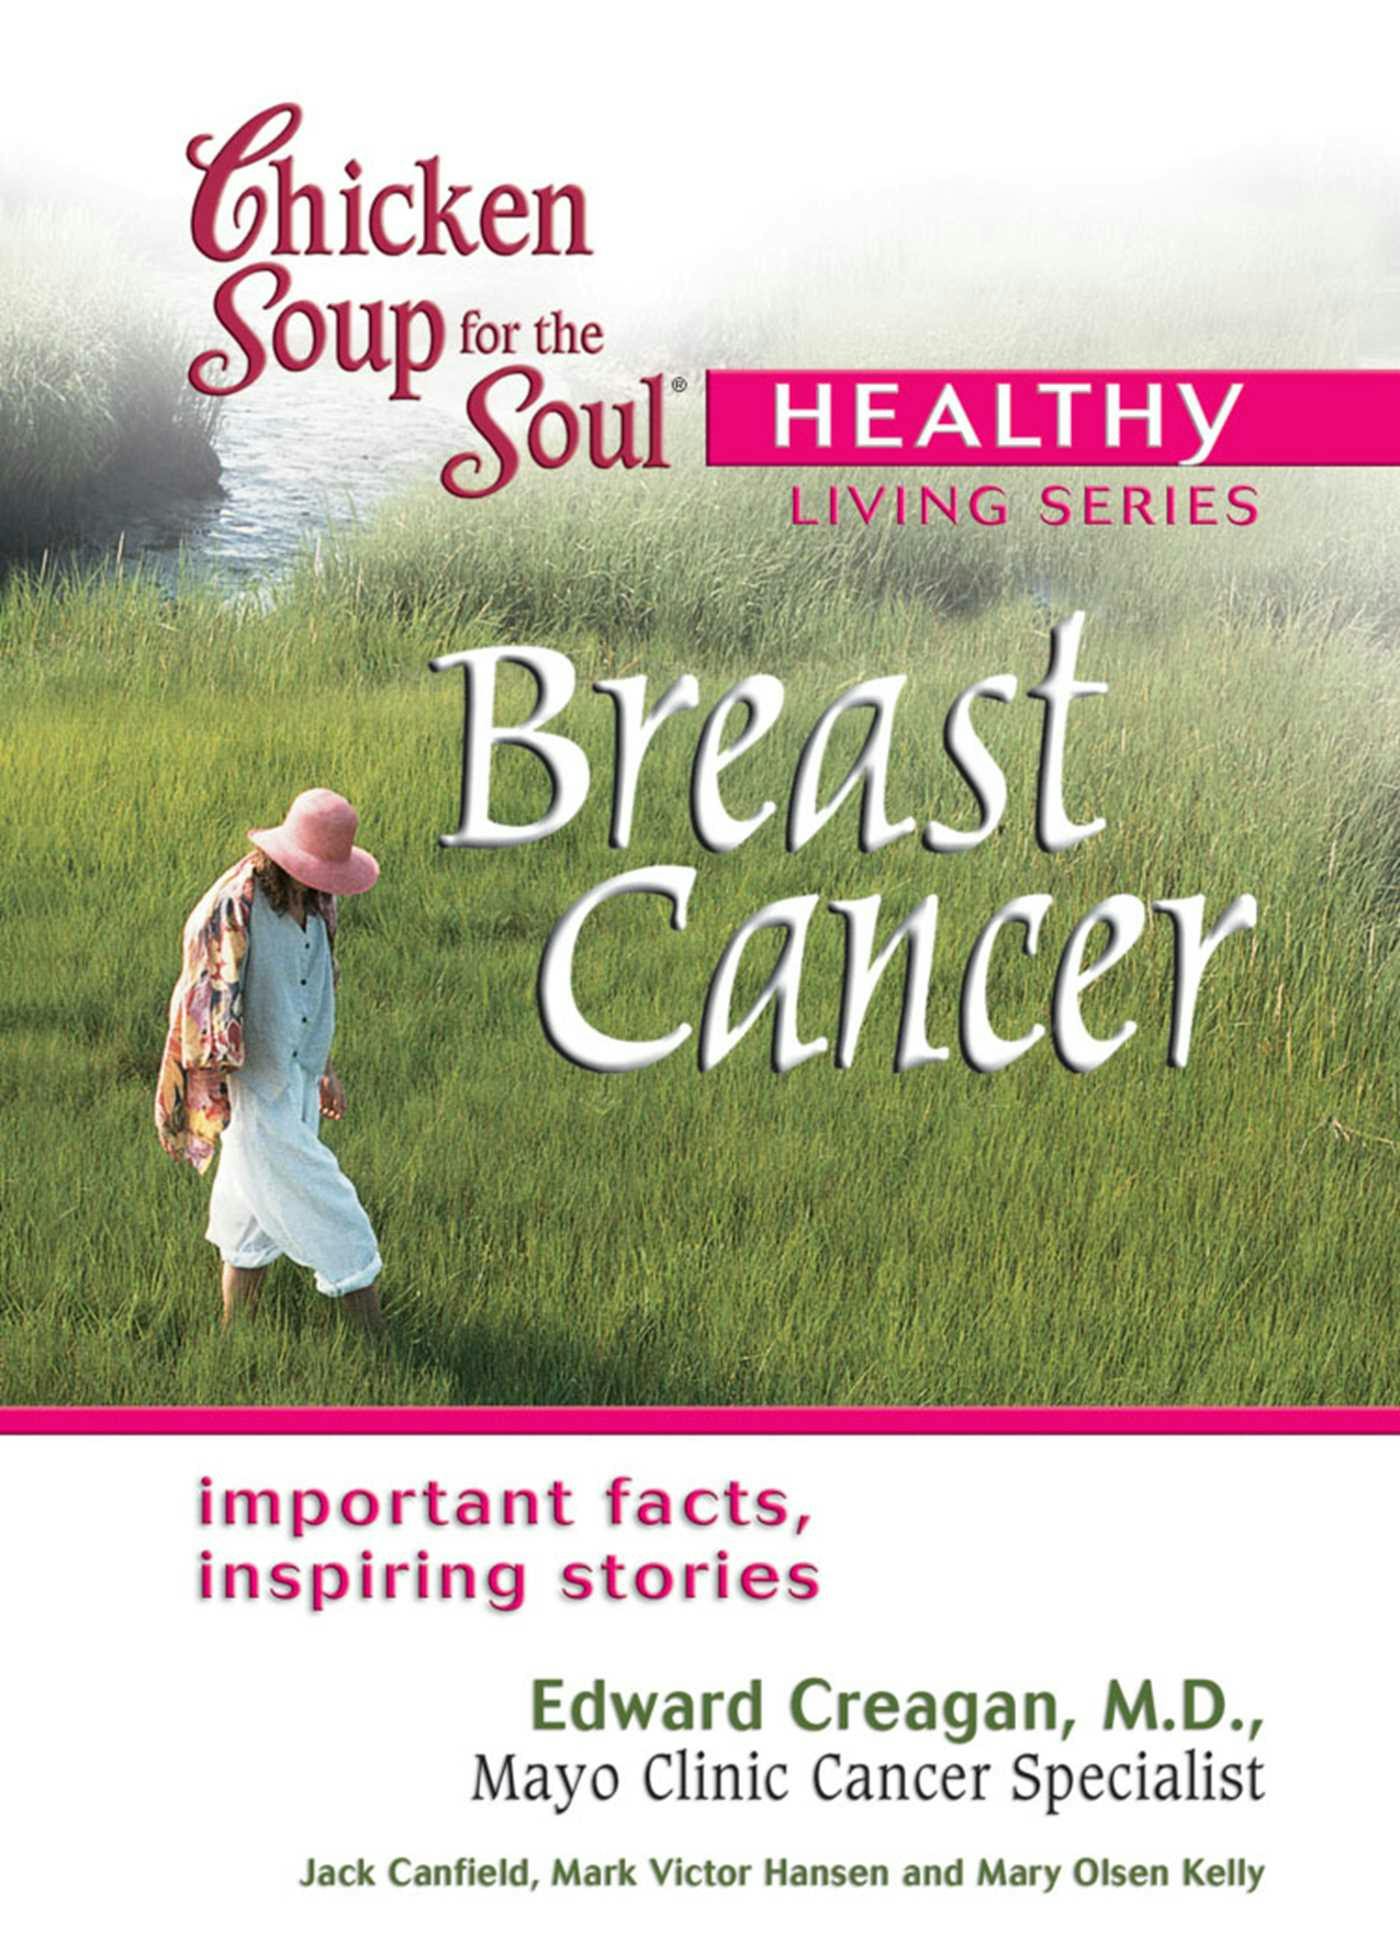 Chicken Soup for the Soul Healthy Living Series: Breast Cancer: Important Facts, Inspiring Stories - Mark Victor Hansen, Jack Canfield